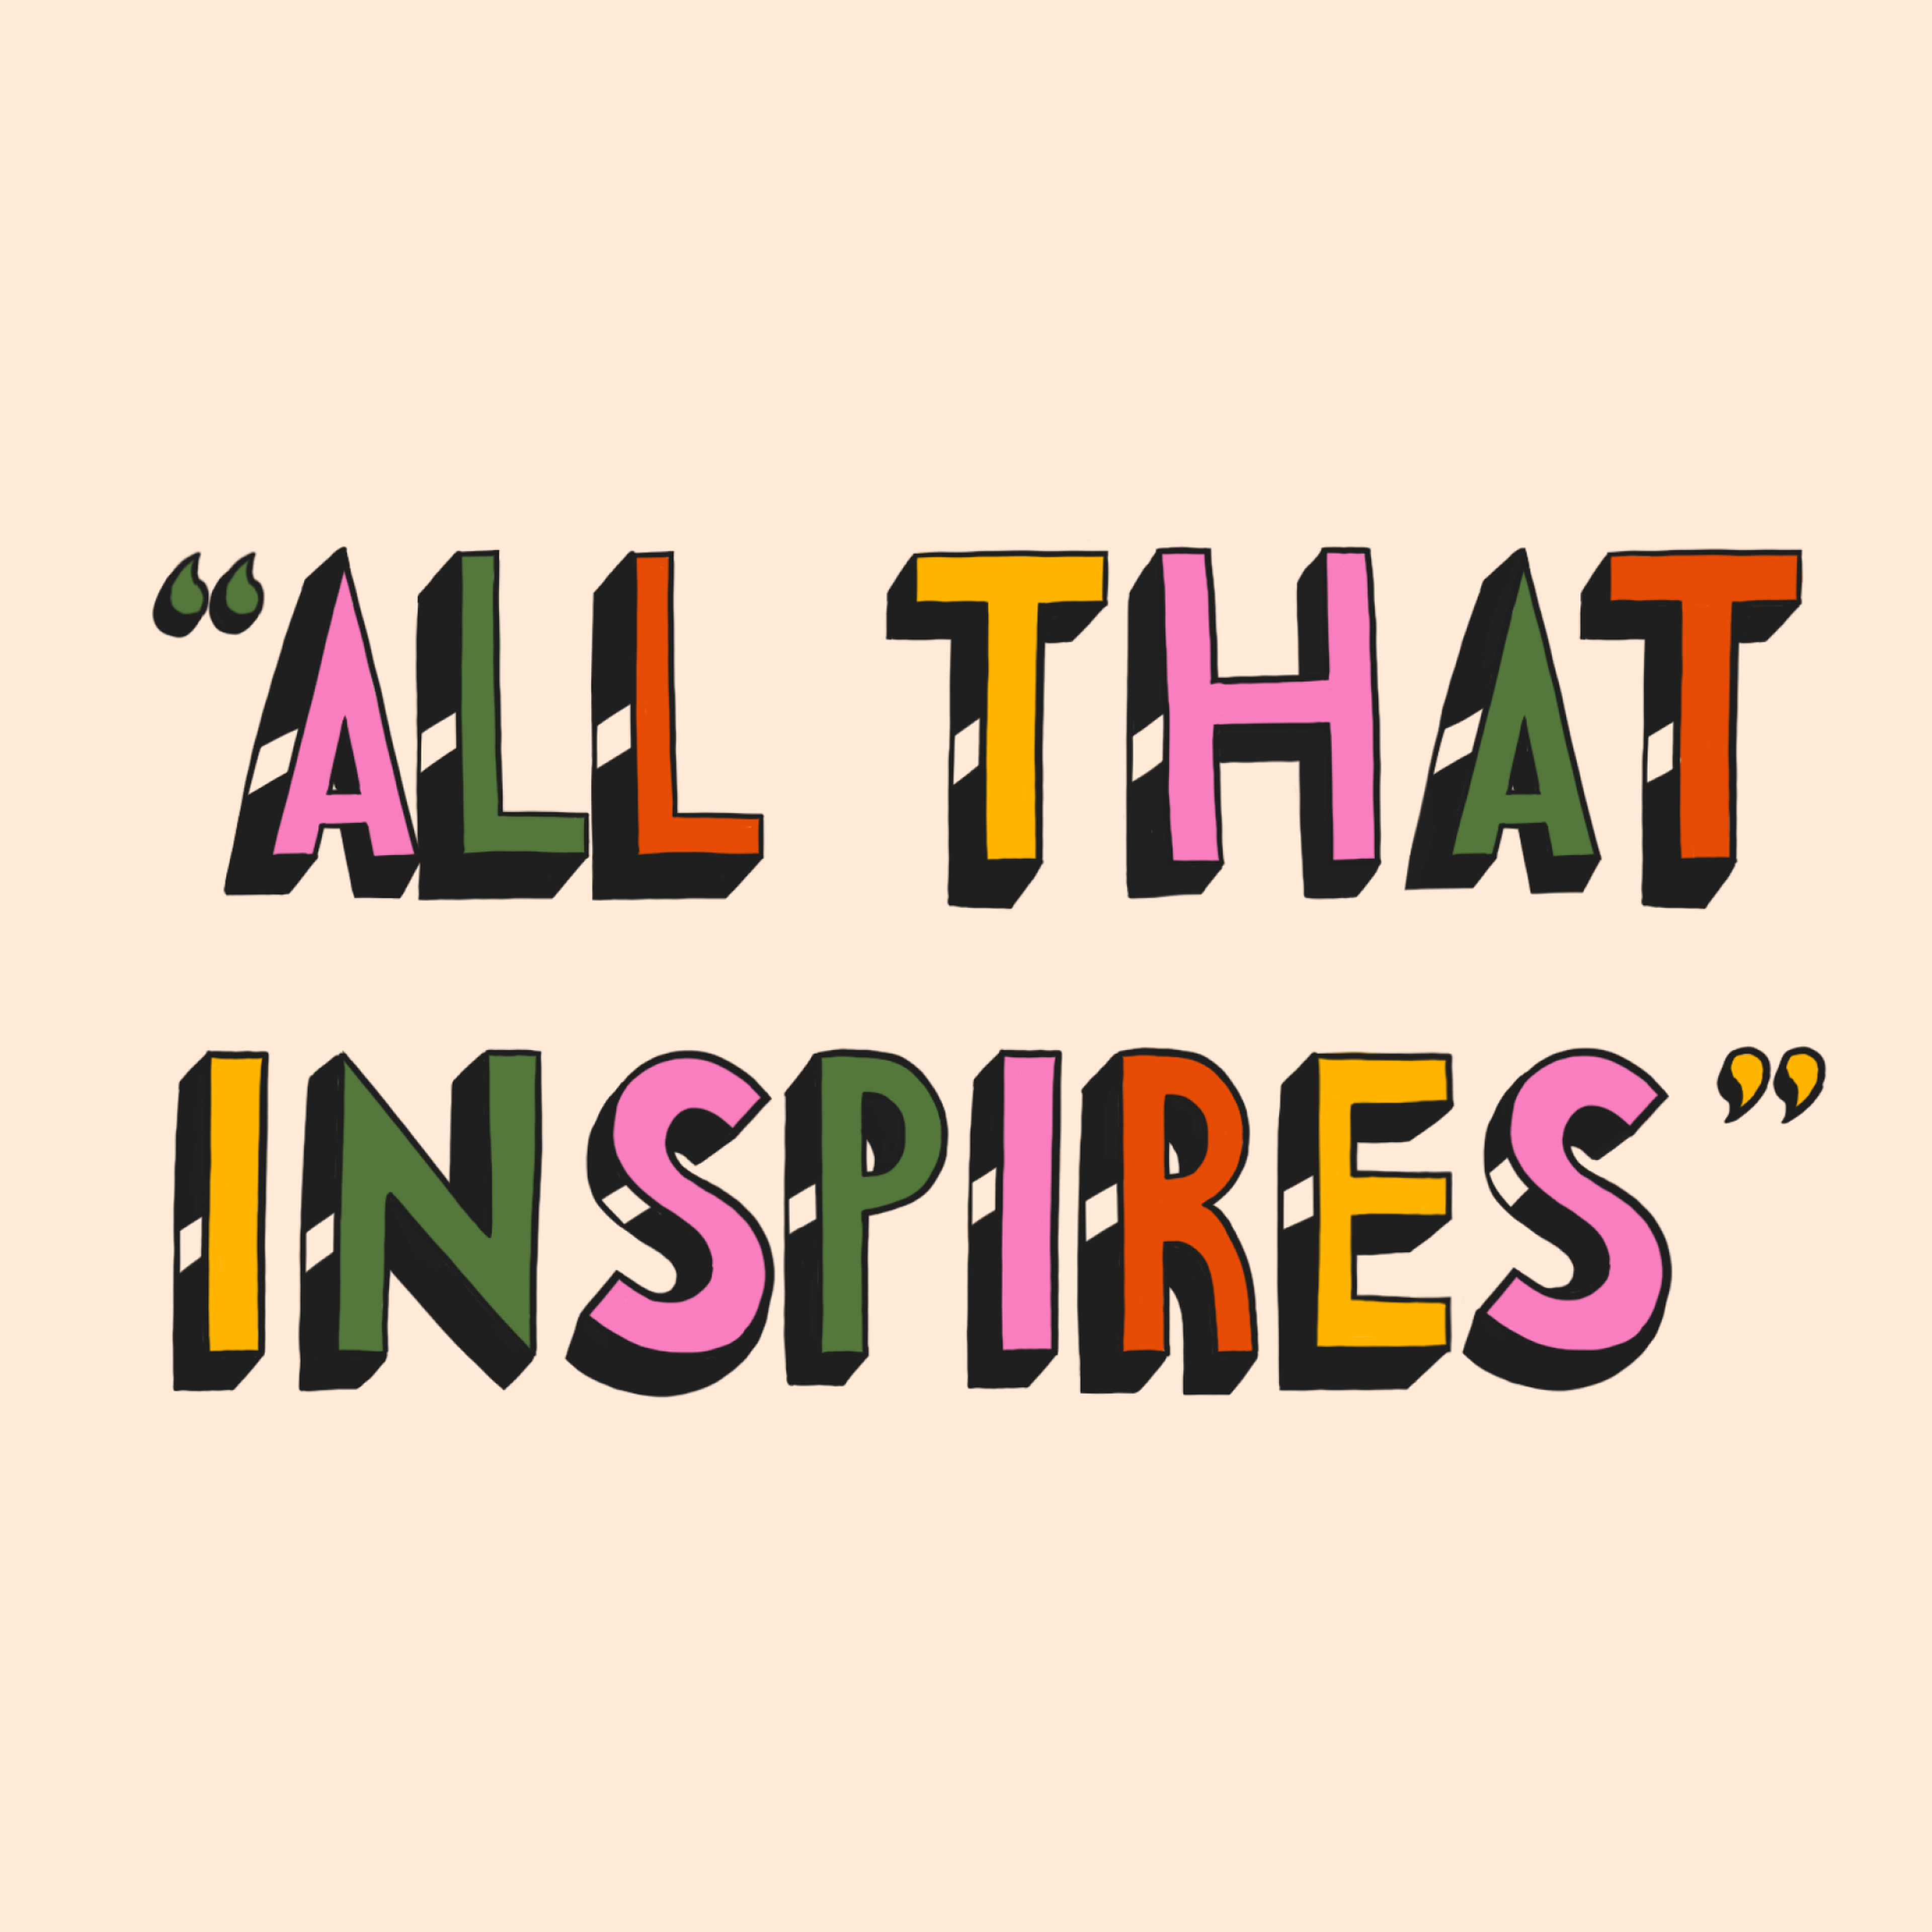 All that inspires